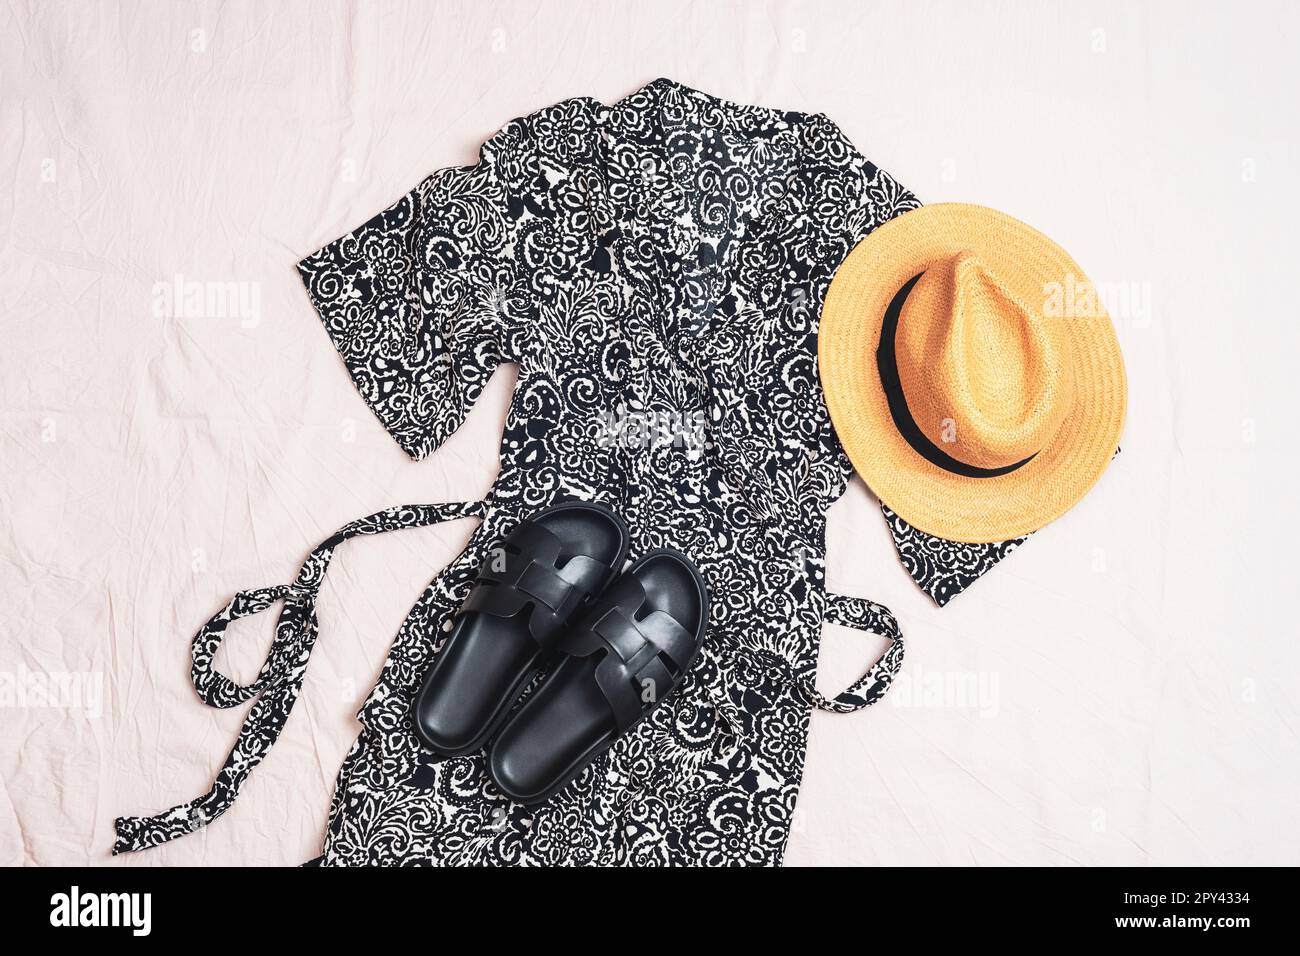 Feminine clothes and accessories with black dress, straw hat and sandals on white background. Overhead view of woman's casual day outfit. Trendy styli Stock Photo